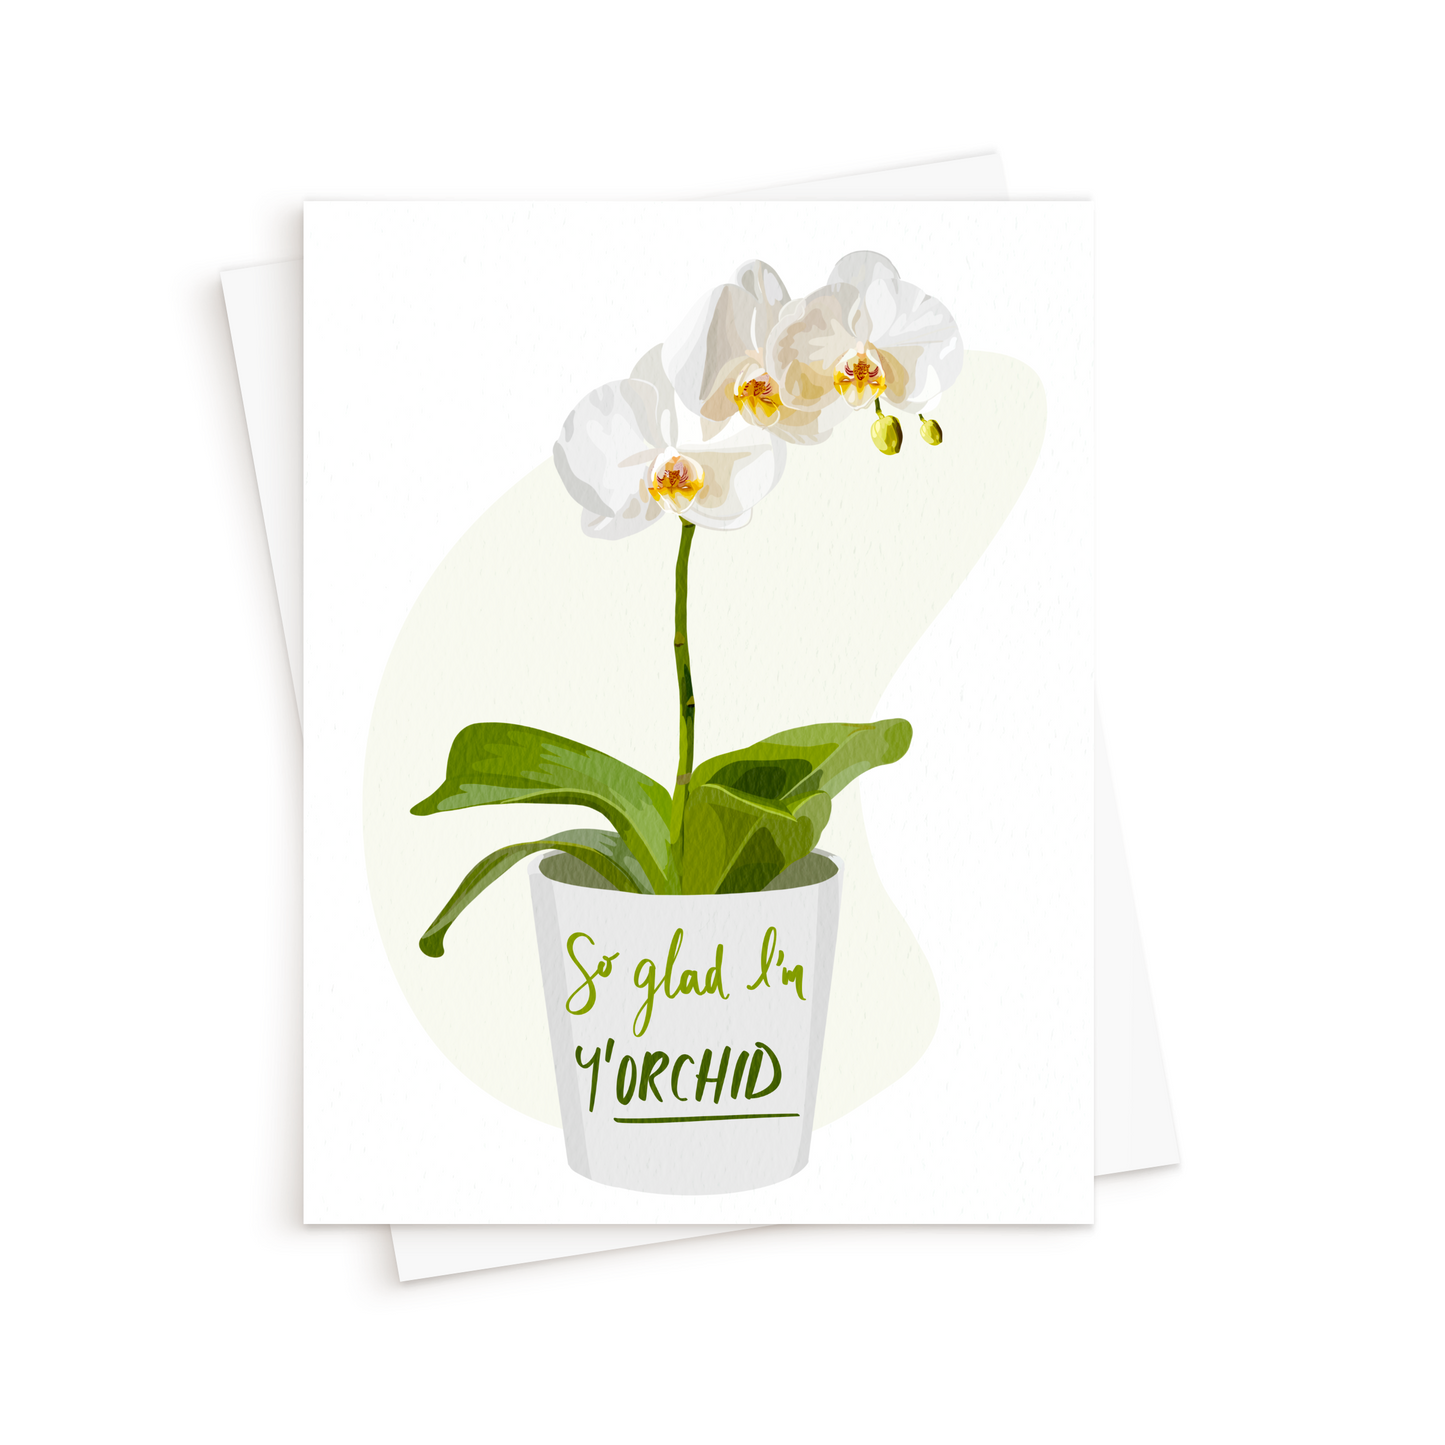 The Y’Orchid Card